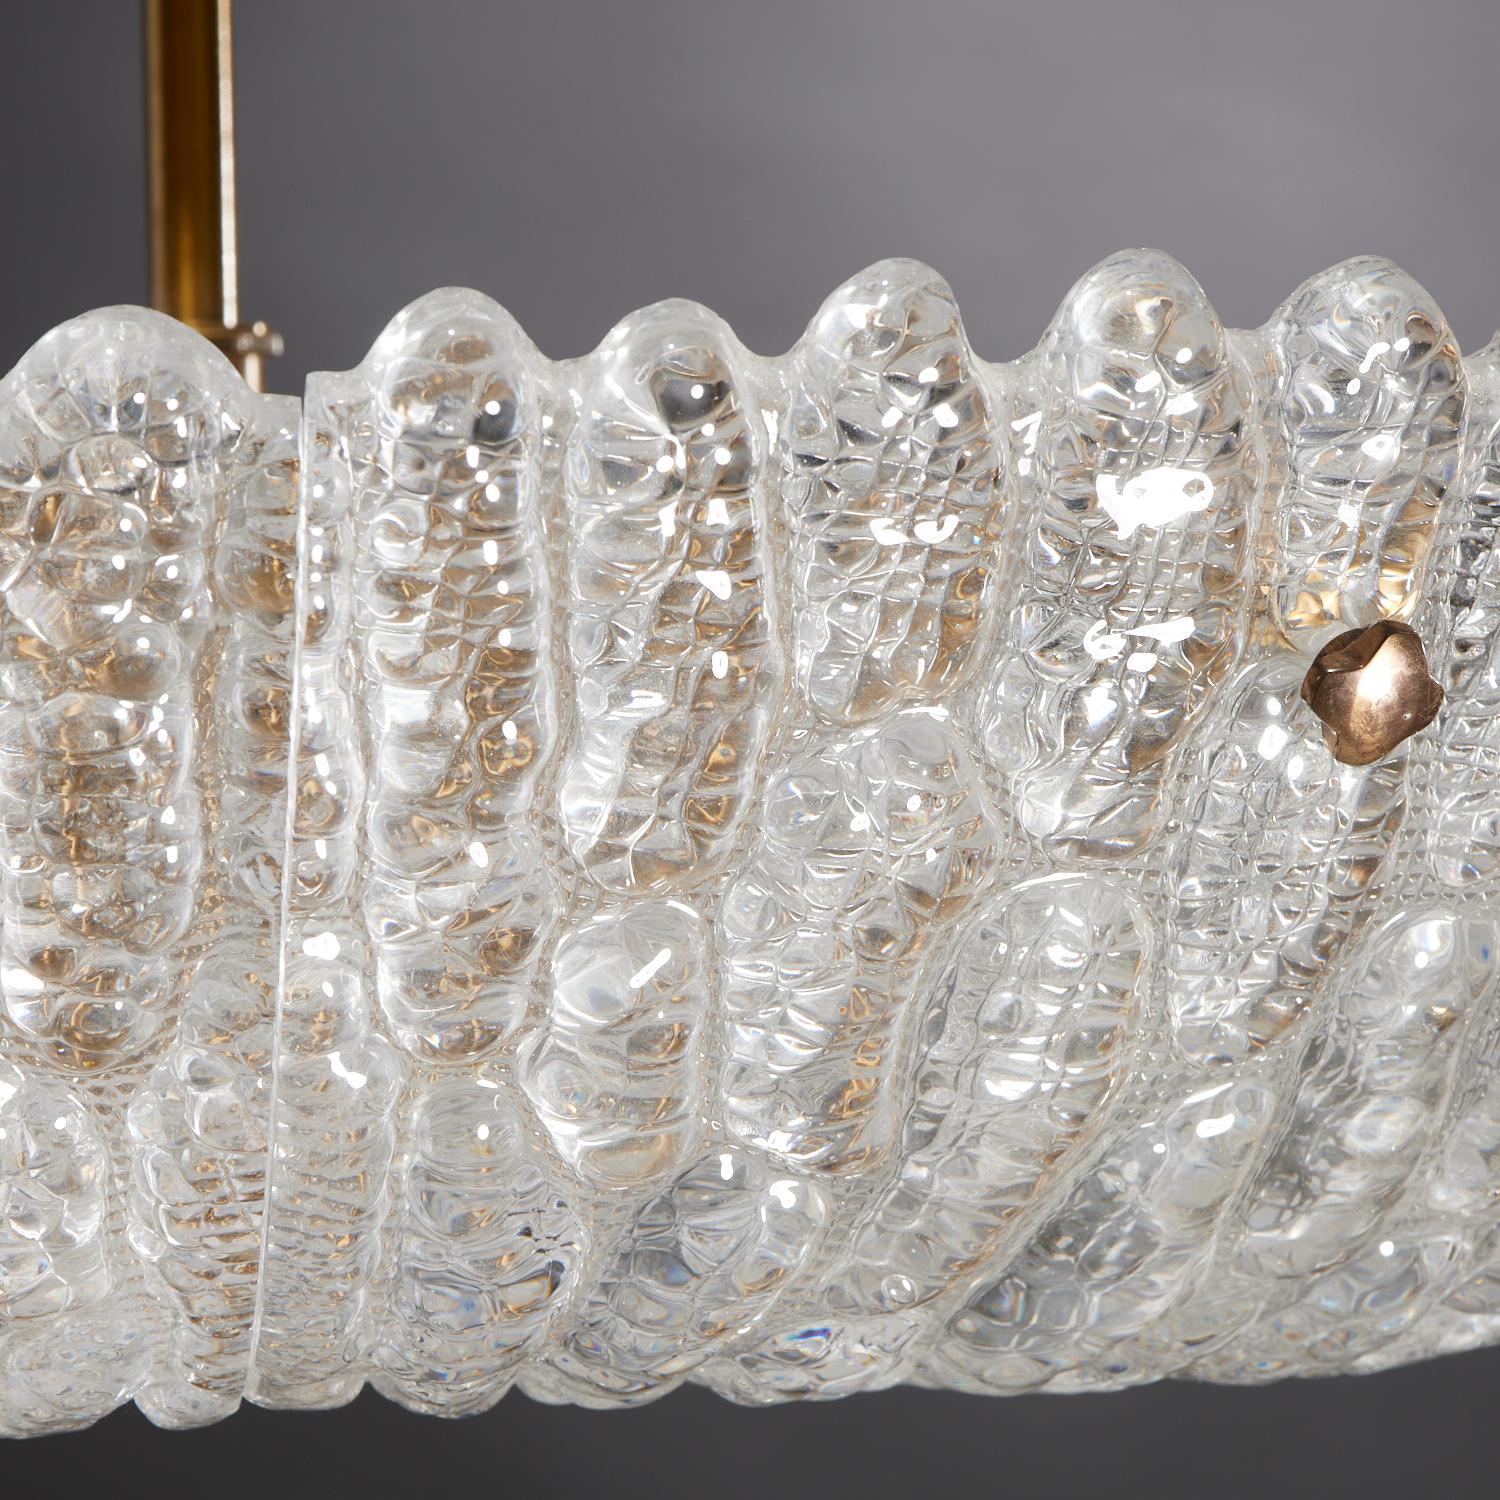 Textured clear glass and brass chandelier by Carl Fagerlund for Orrefors.
Mounted with 16 electrified sockets, includes canopy.